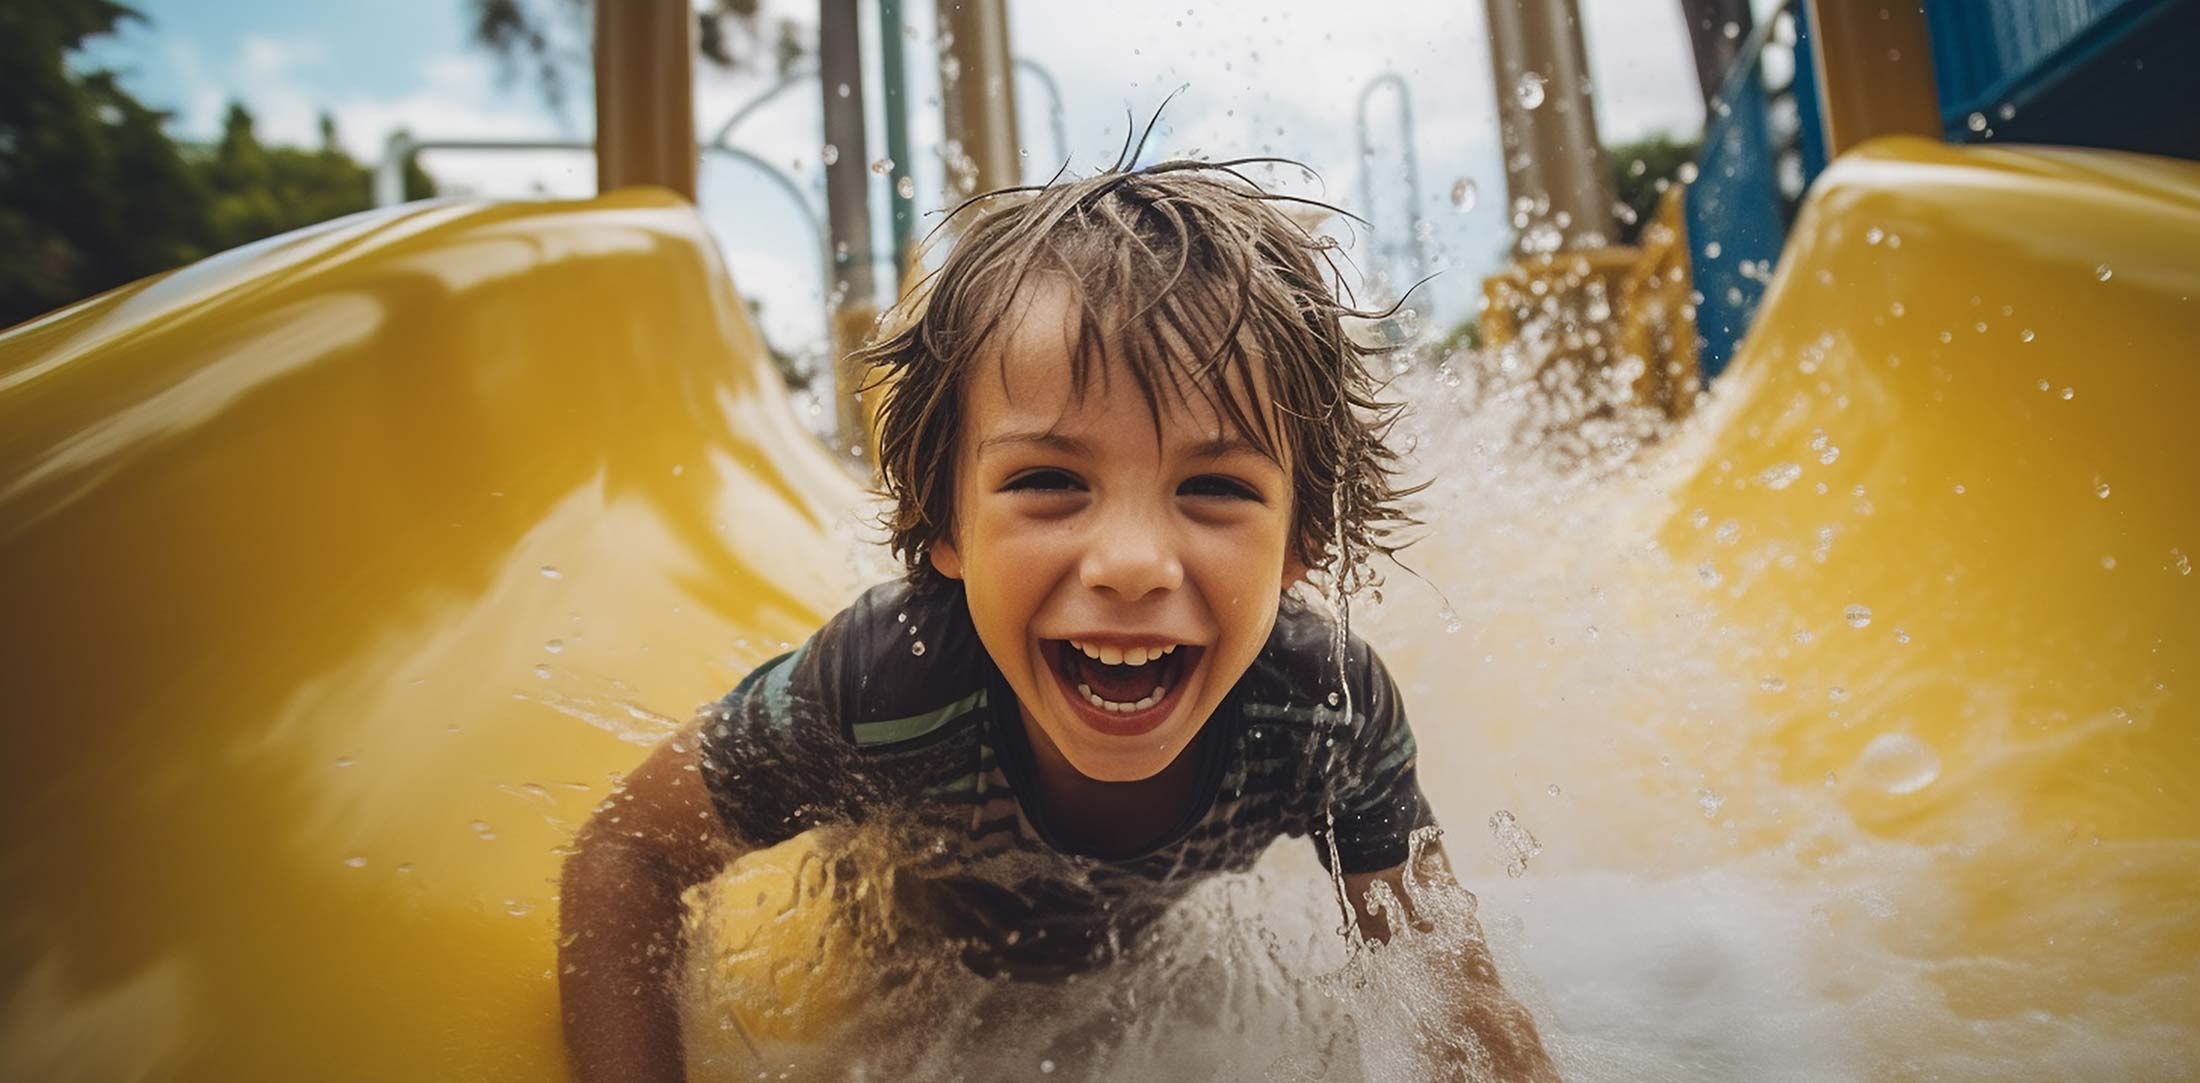 Front view smiley boy in a yellow water park slide